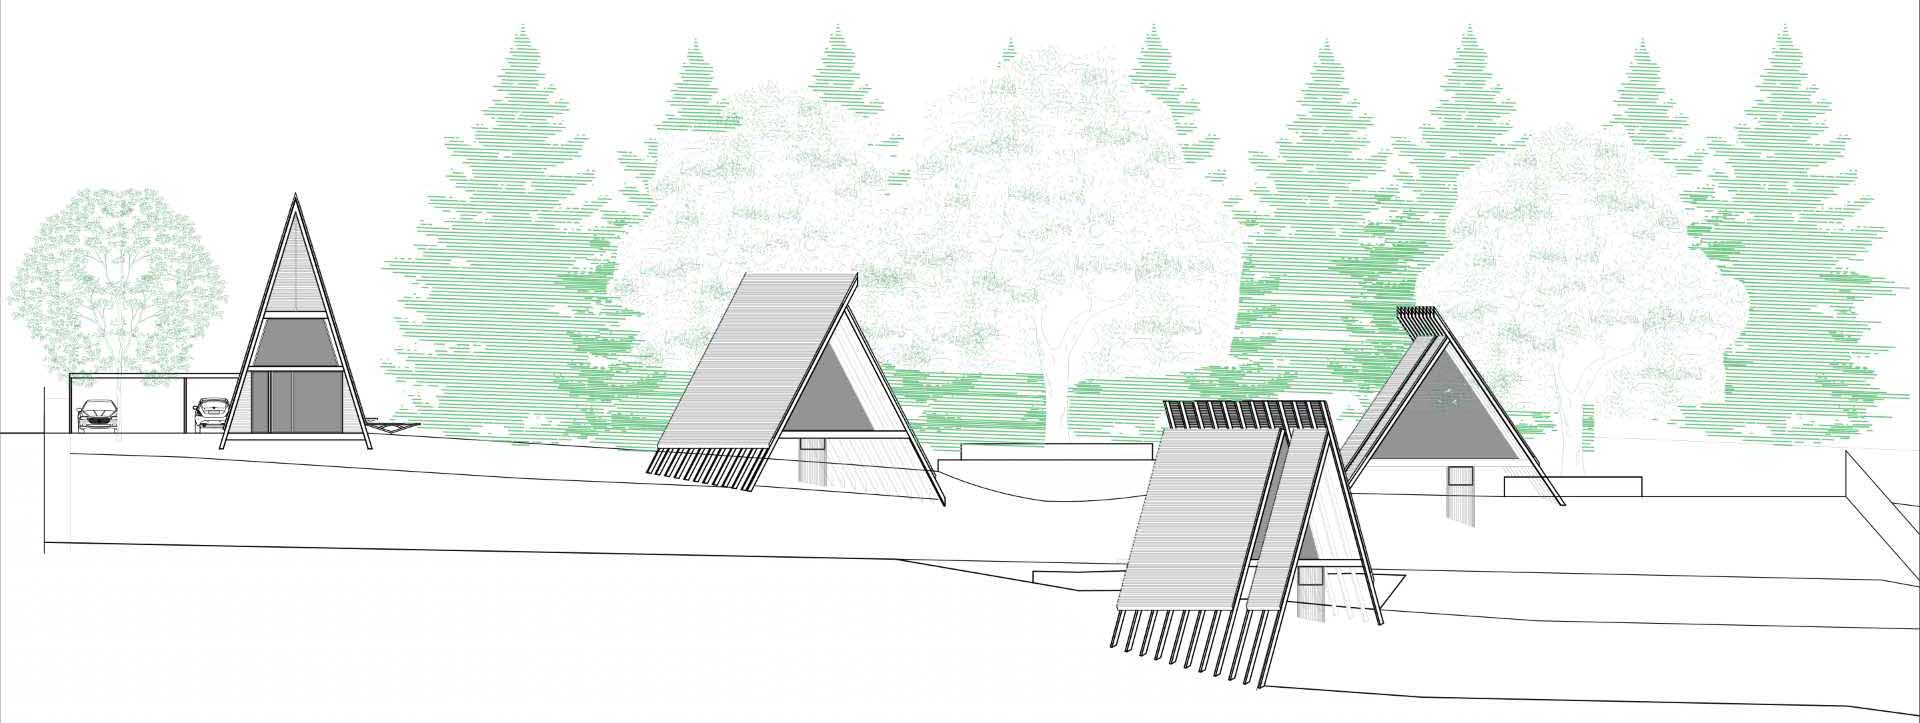 Architectural drawings and plans for a collection of A-frame cabins.